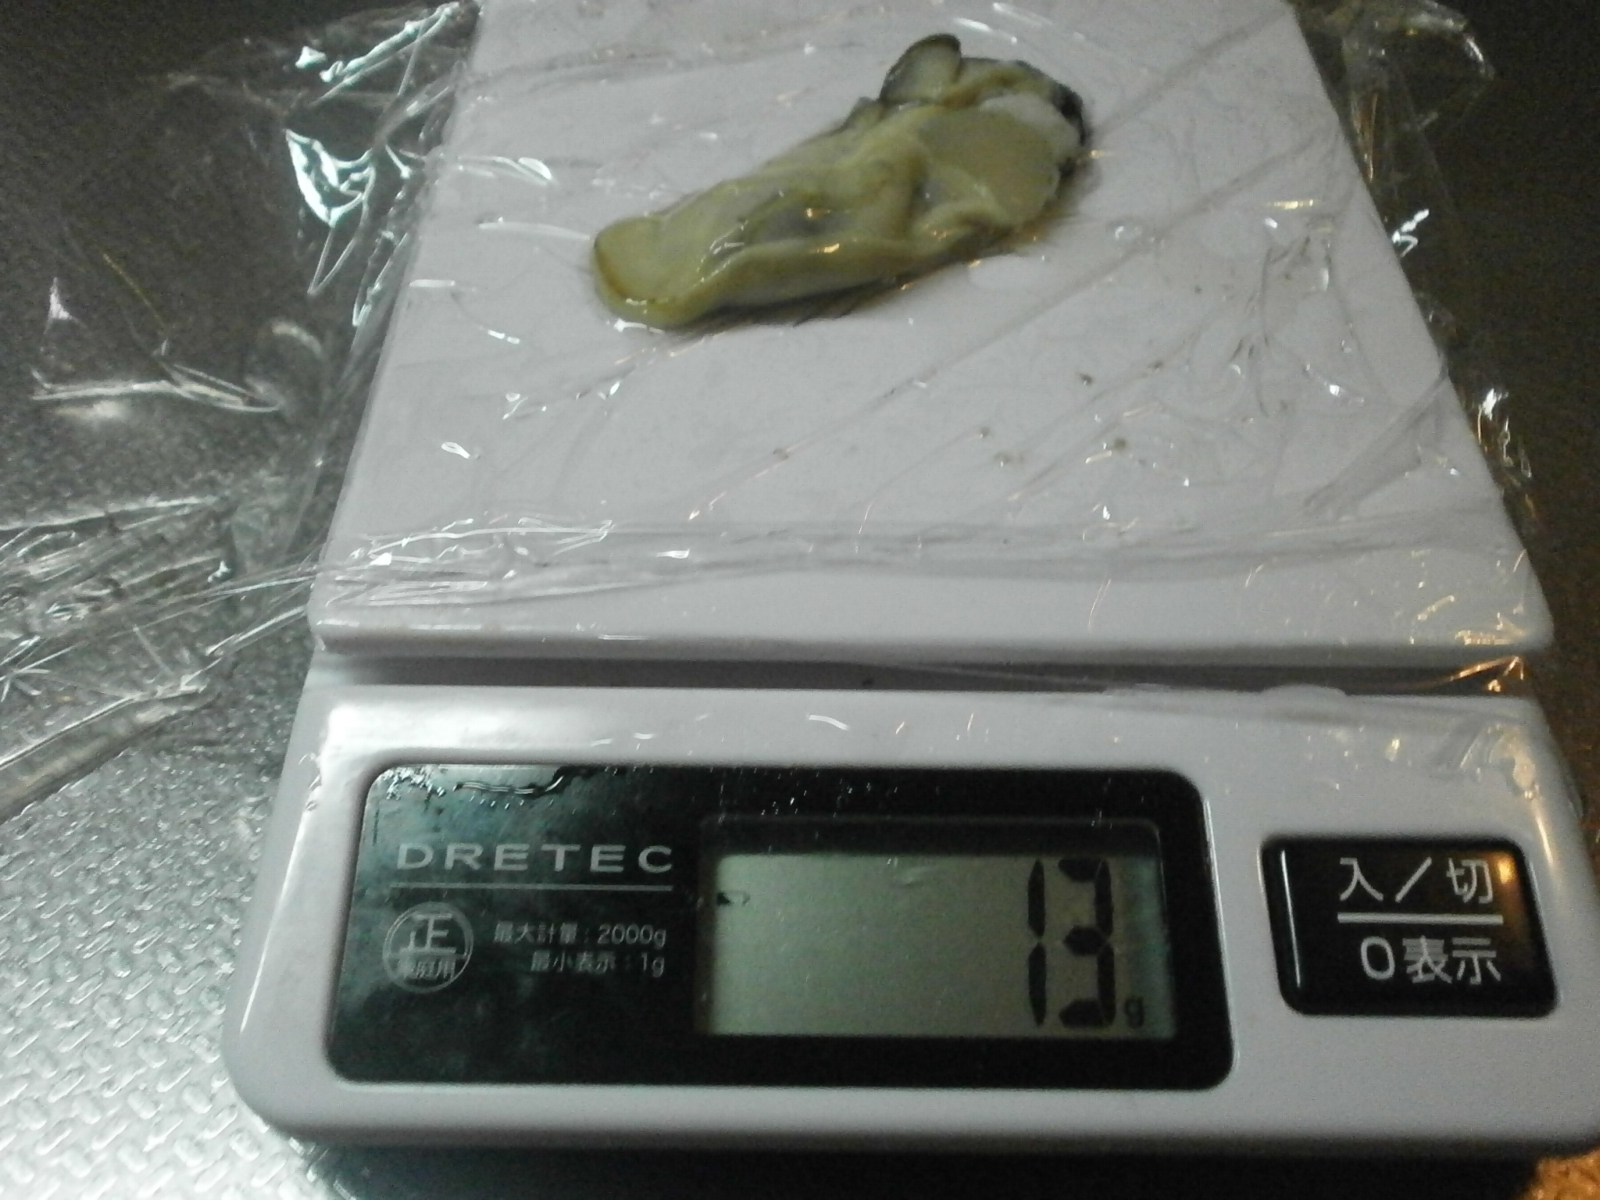 Oysters (g/49 98 / g 13 g)